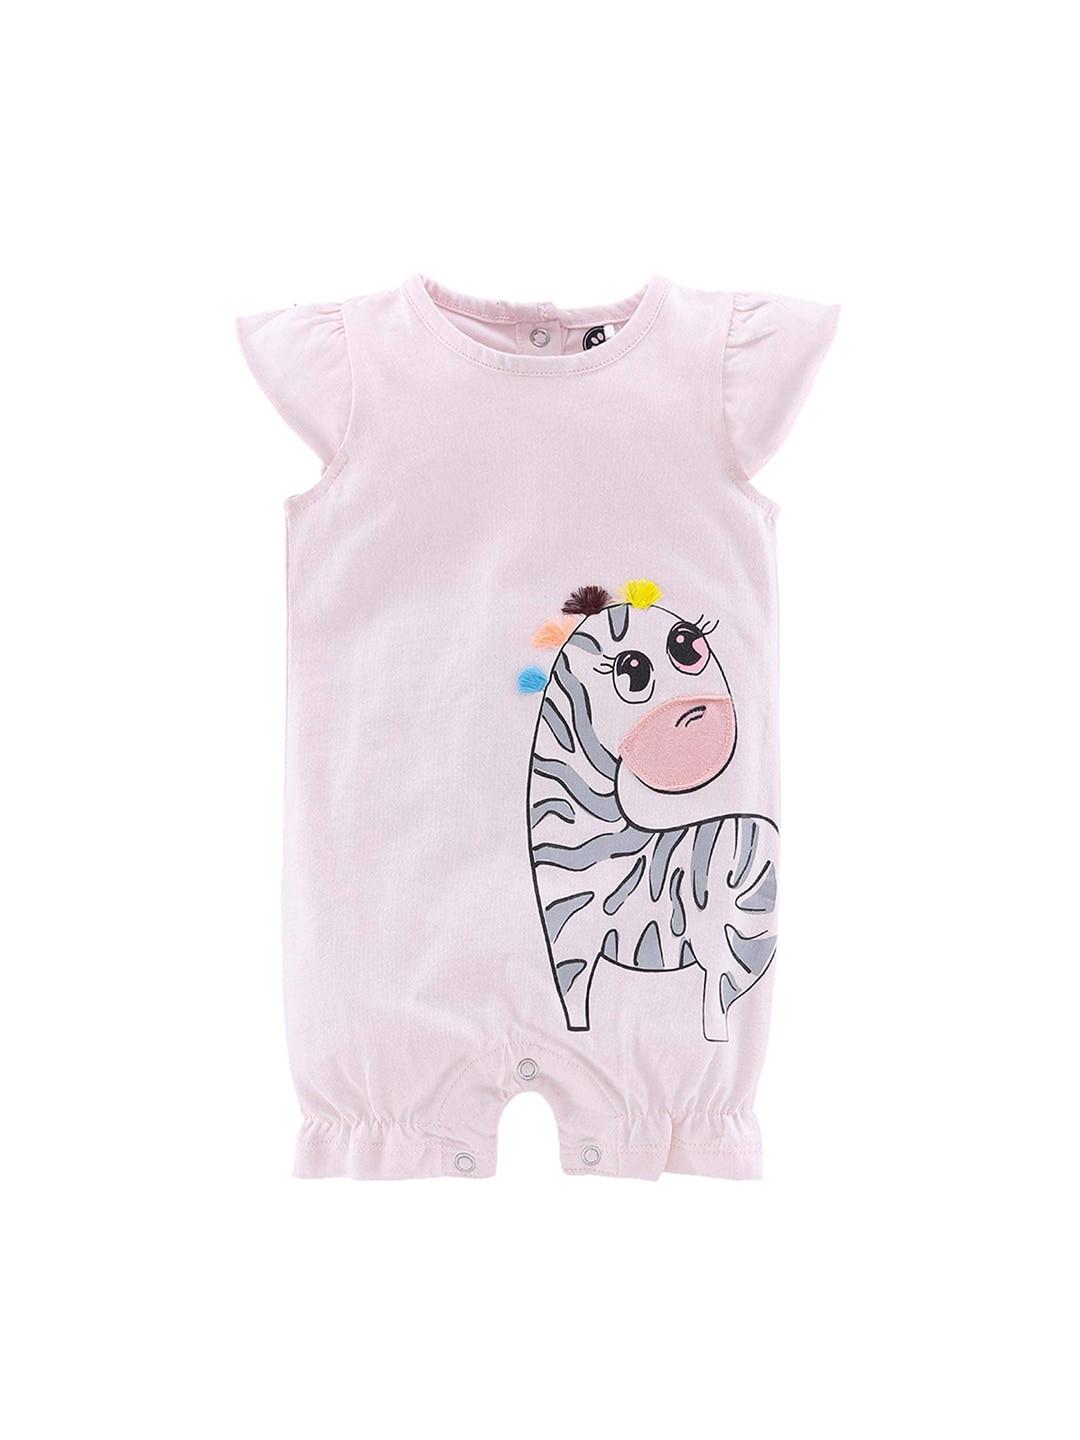 JusCubs Infant Girls Printed Cotton Rompers